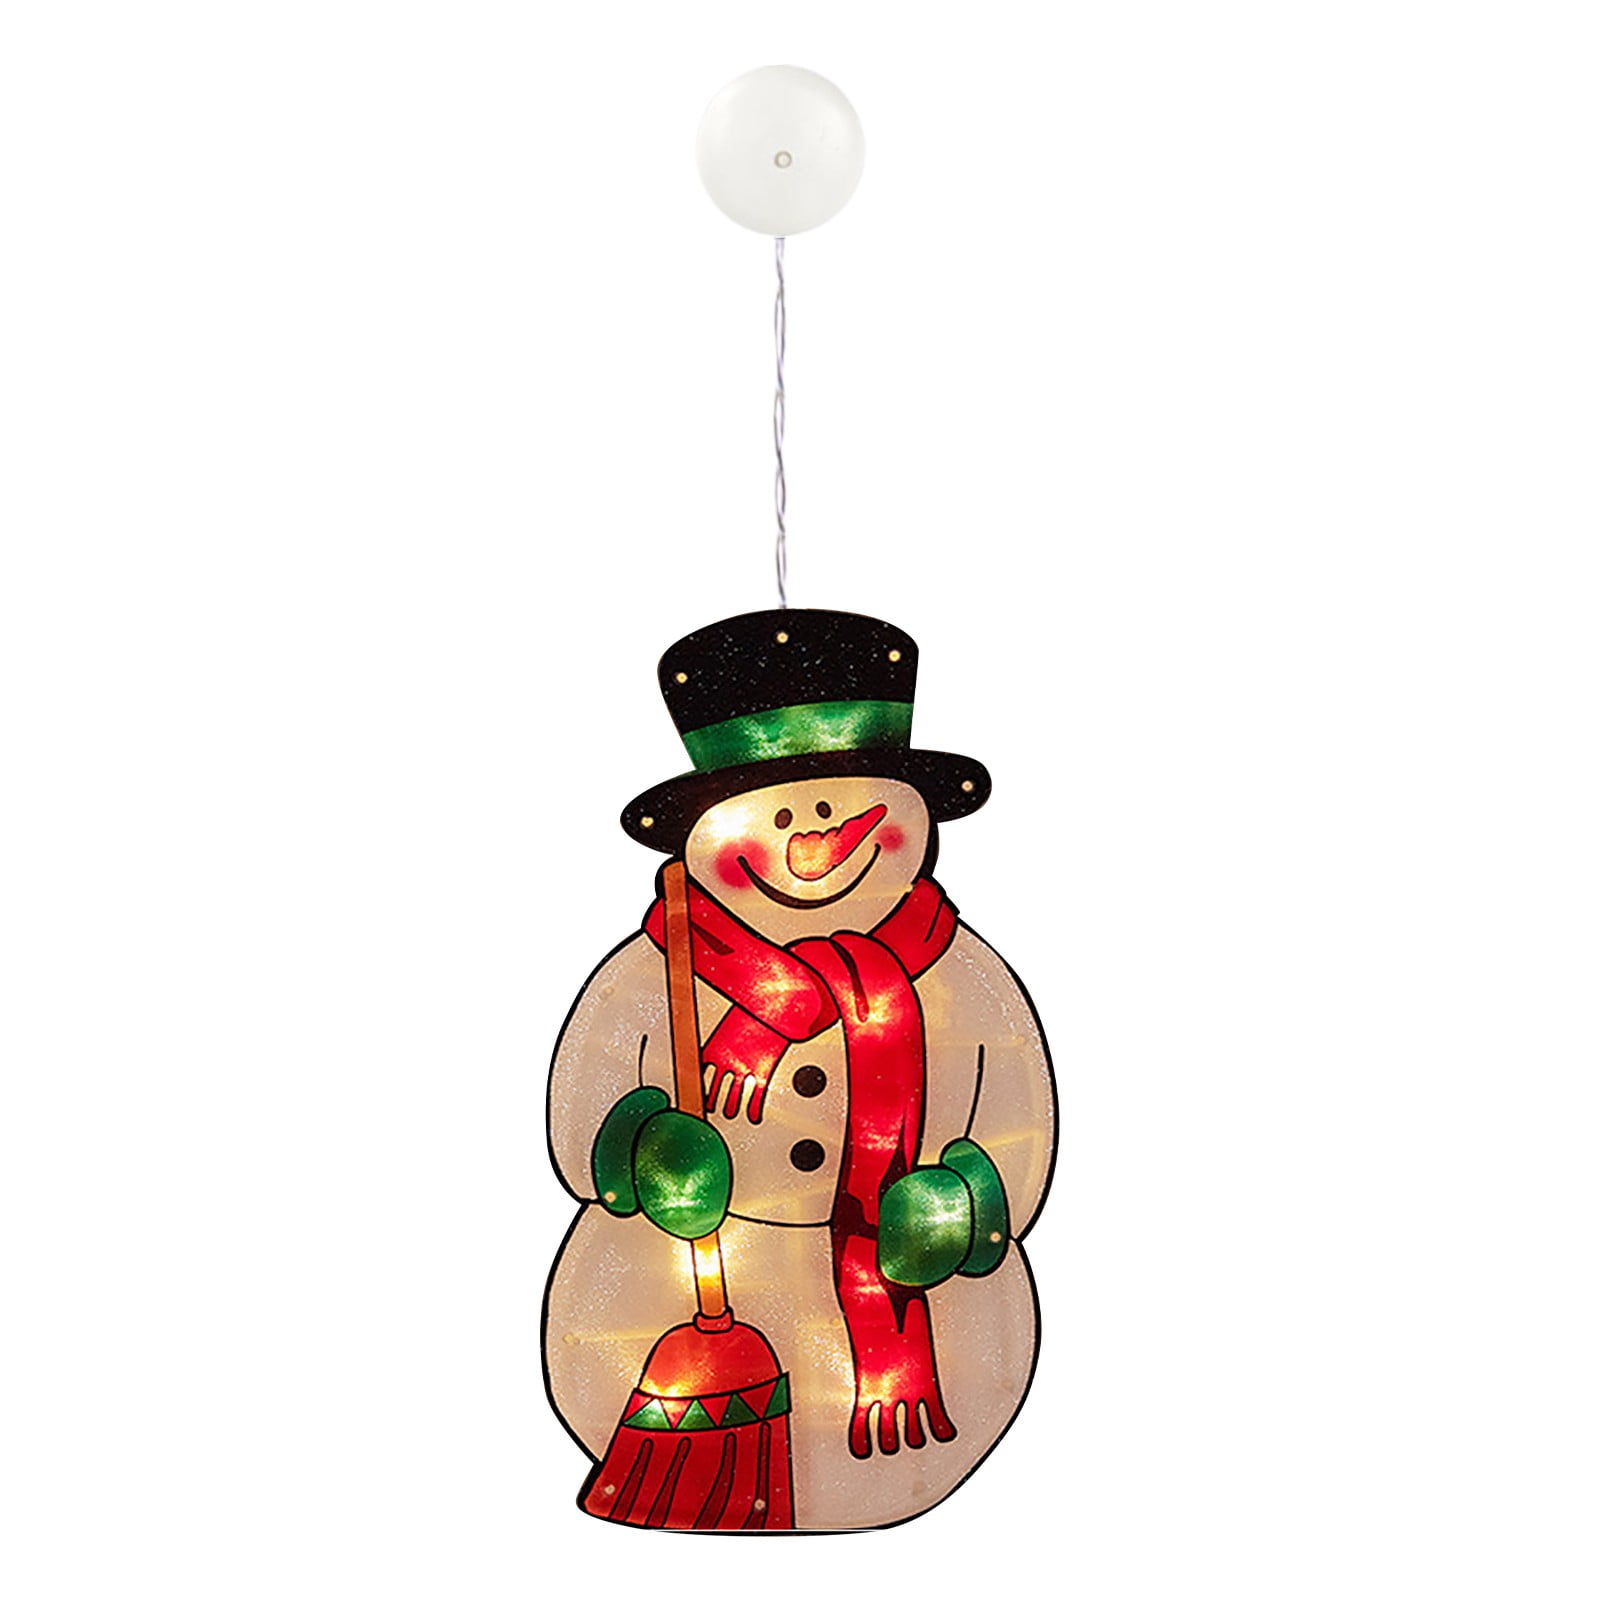 The Benross Christmas Workshop 9-inch LED Water Snowman Ornament 